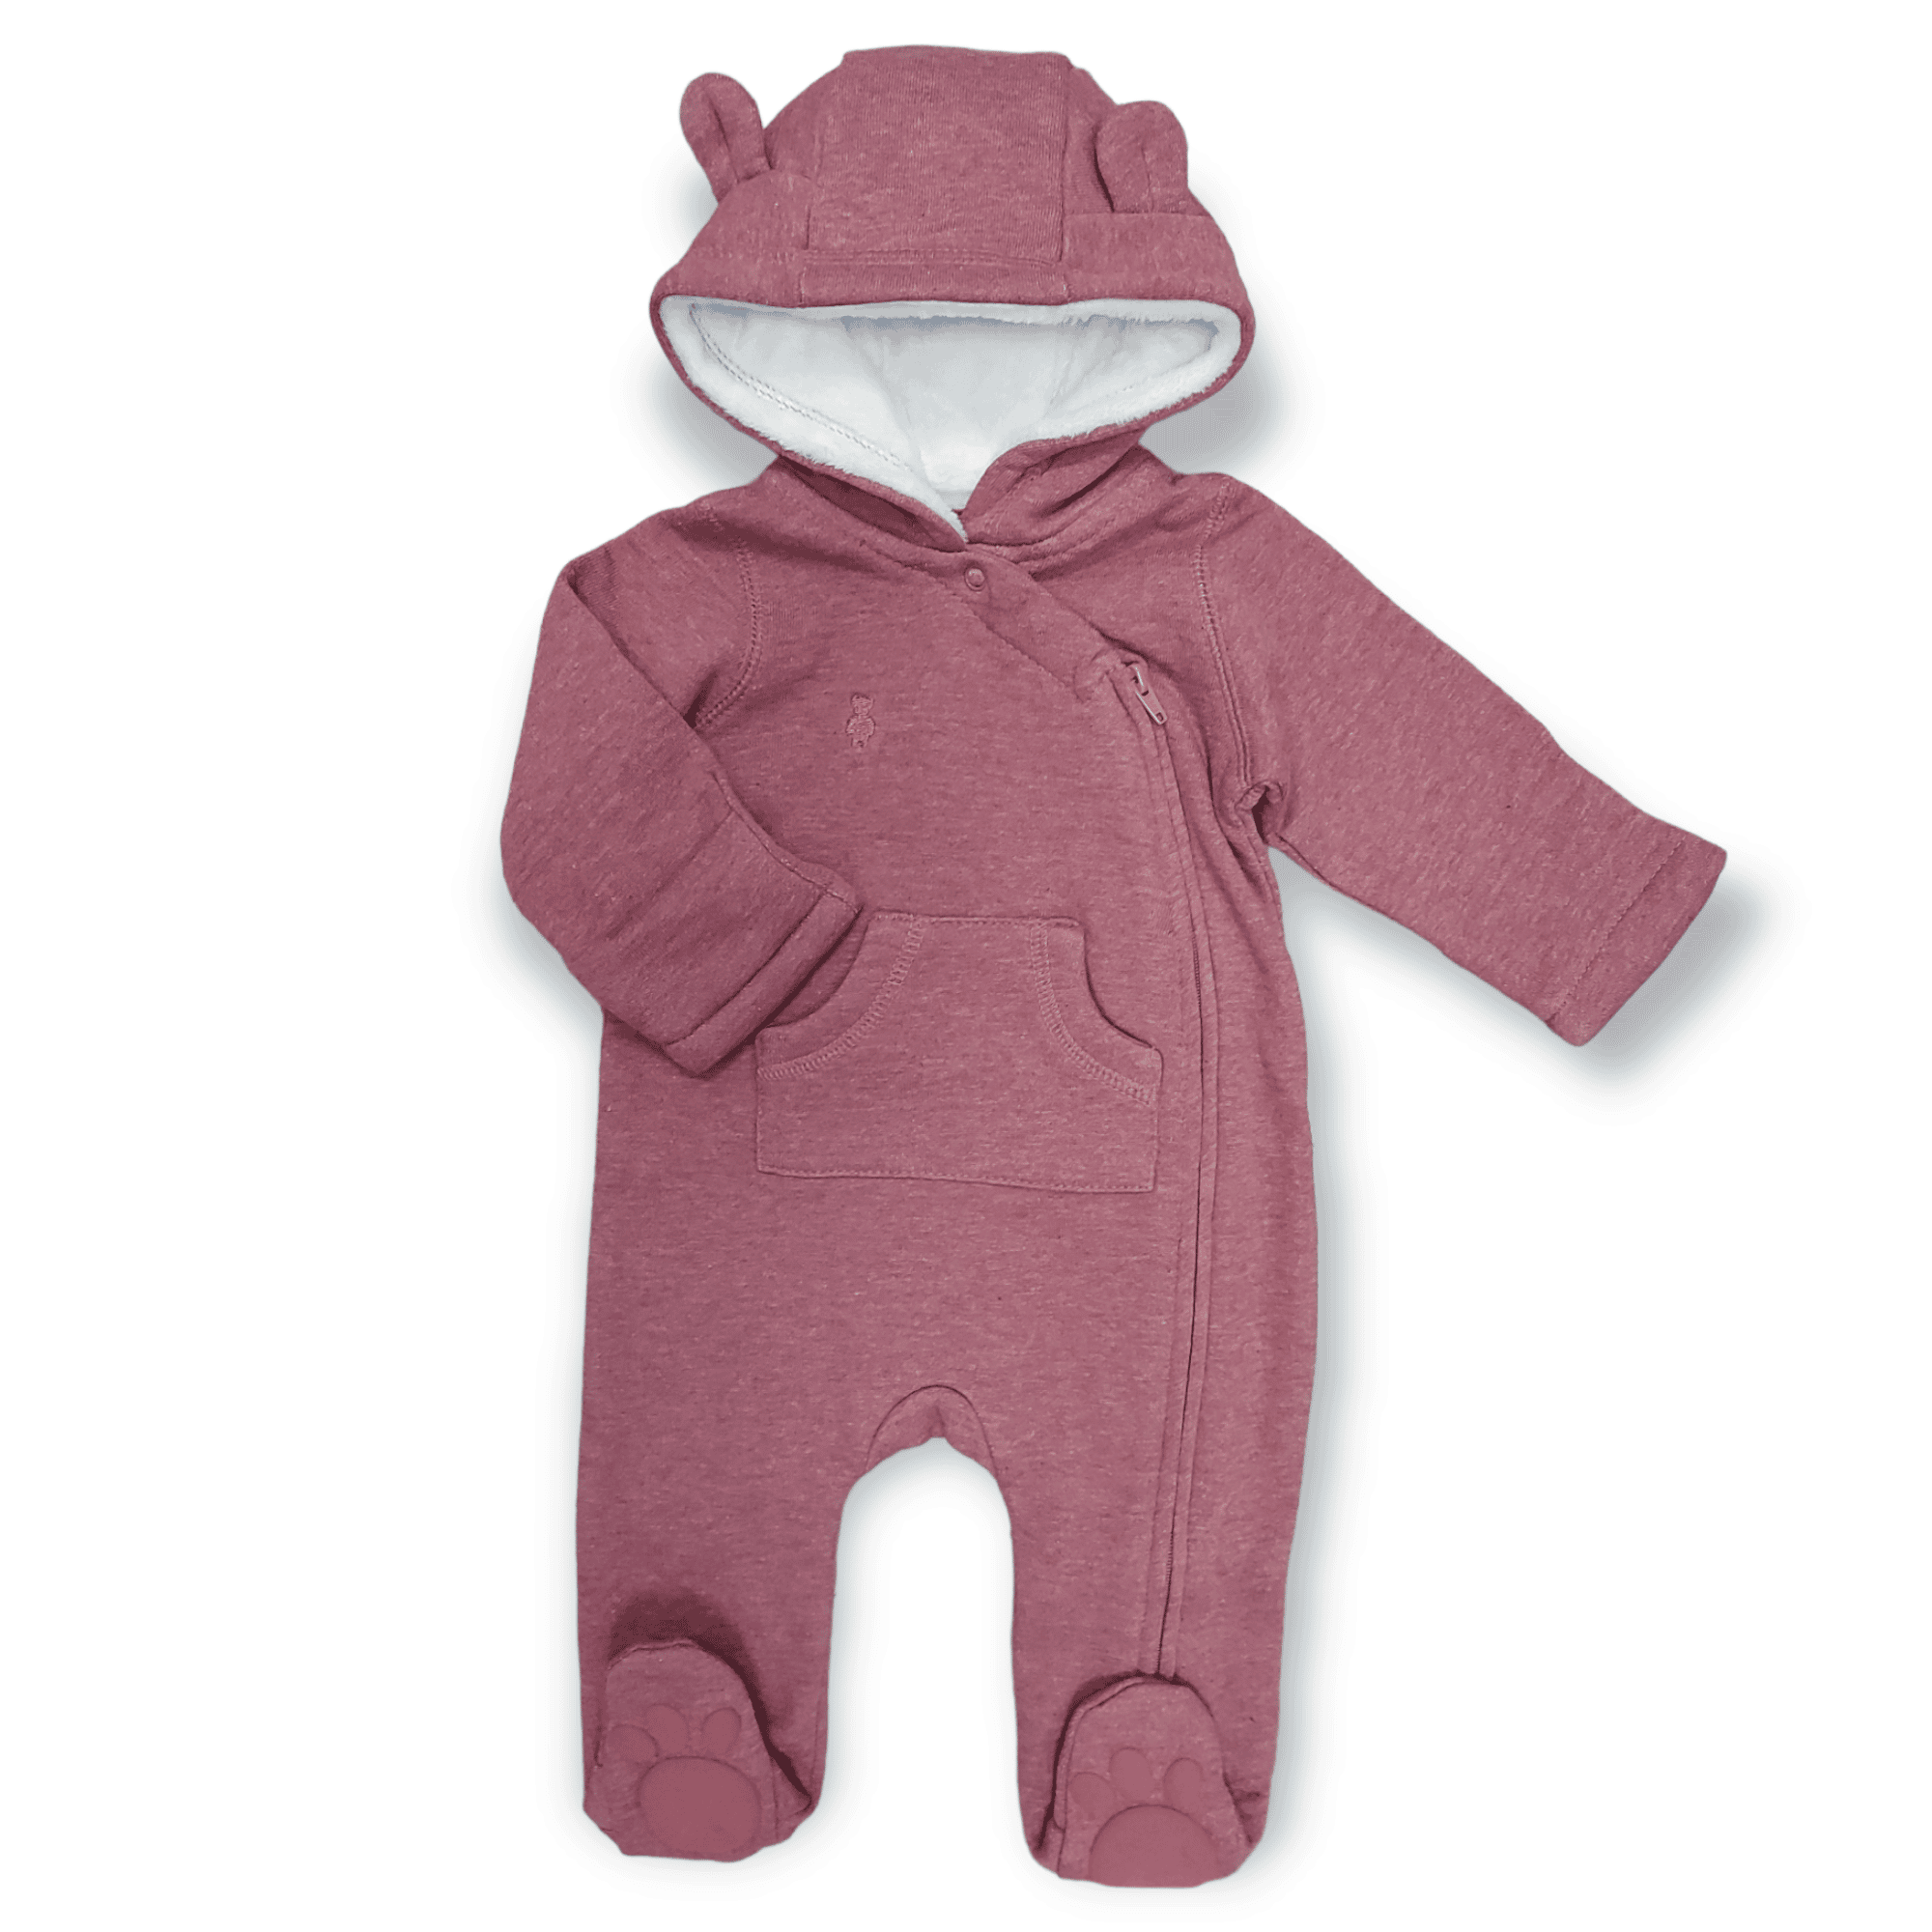 Sweat Overall LITTLE Pink M2003581852509 1